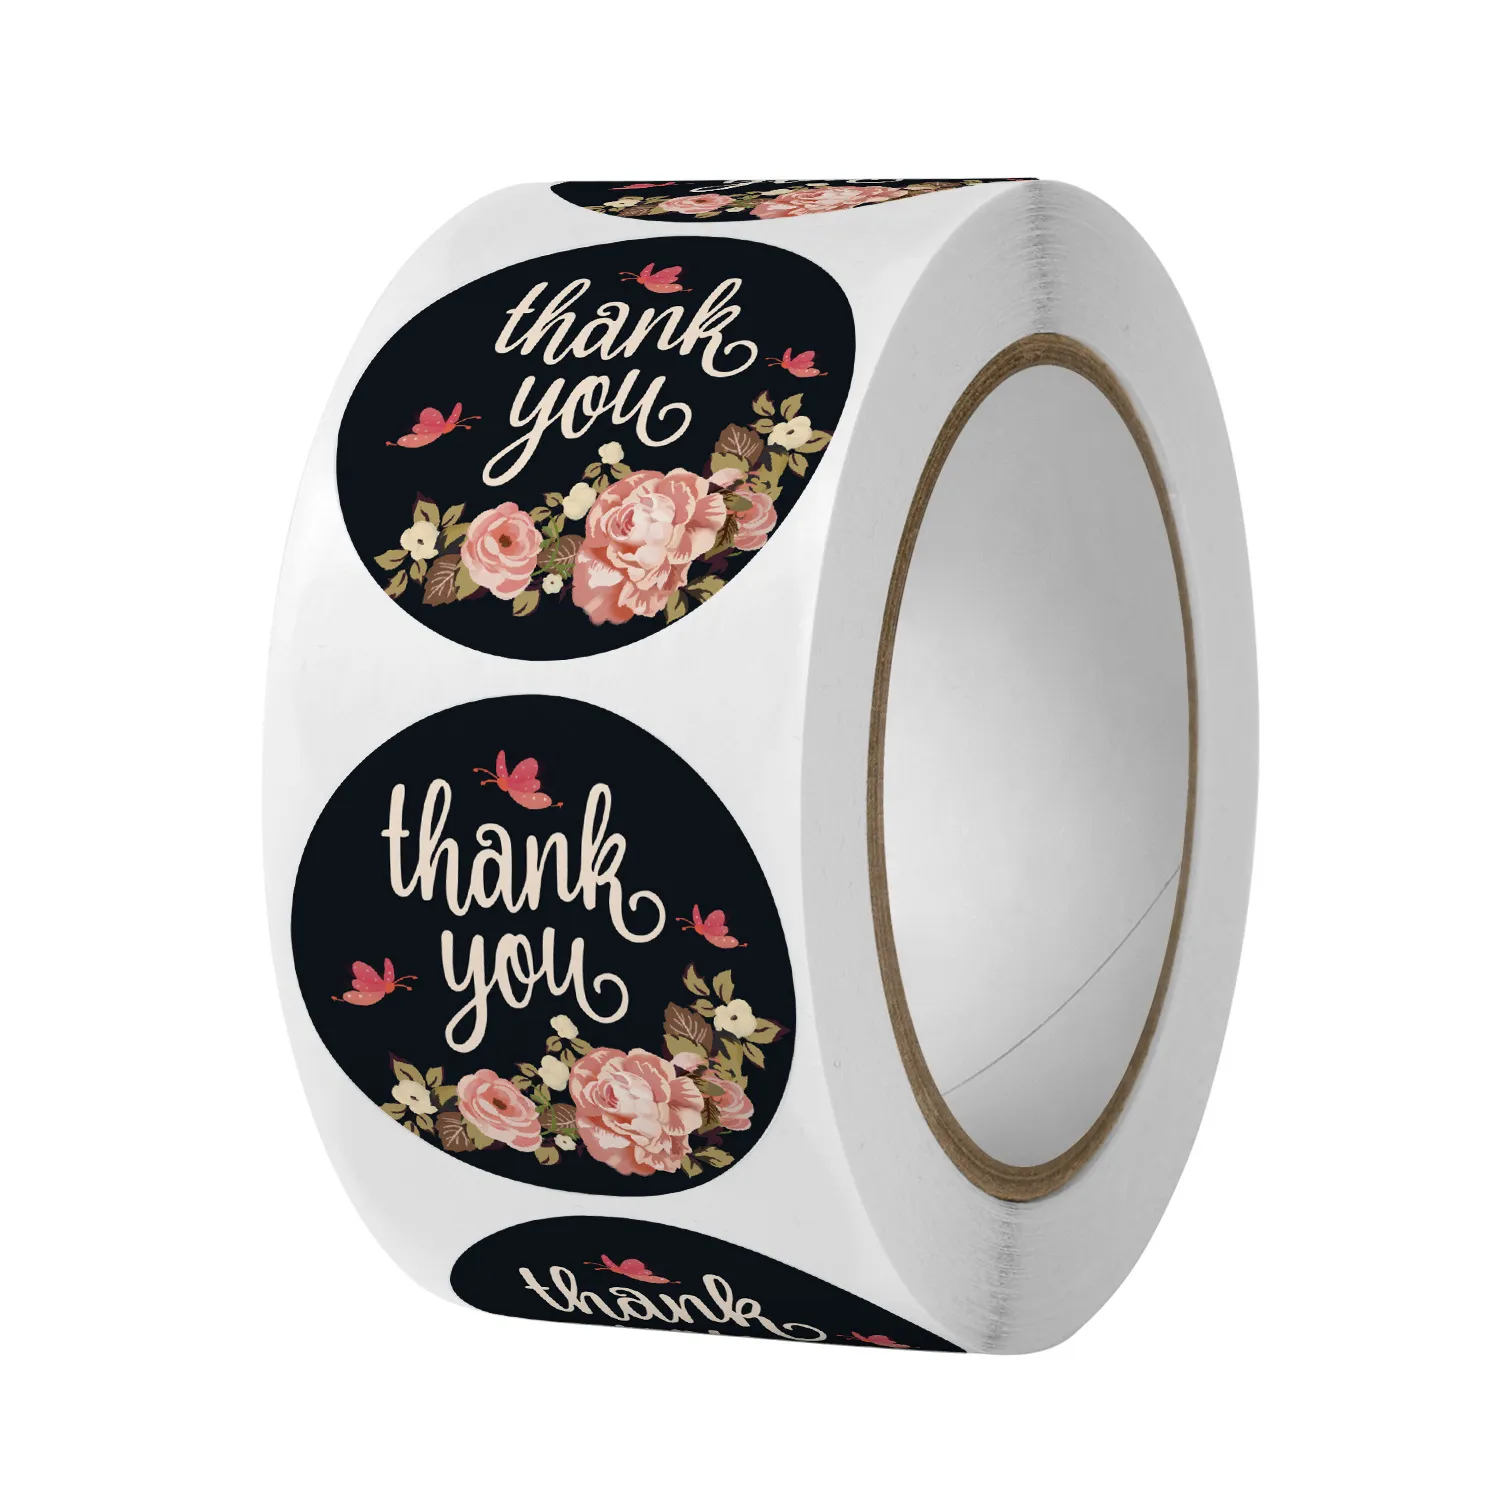 Custom Any Text Image Adhesive Printing Round Label Sticker Adhesive Stickers Roll Vinyl Logo Stickers